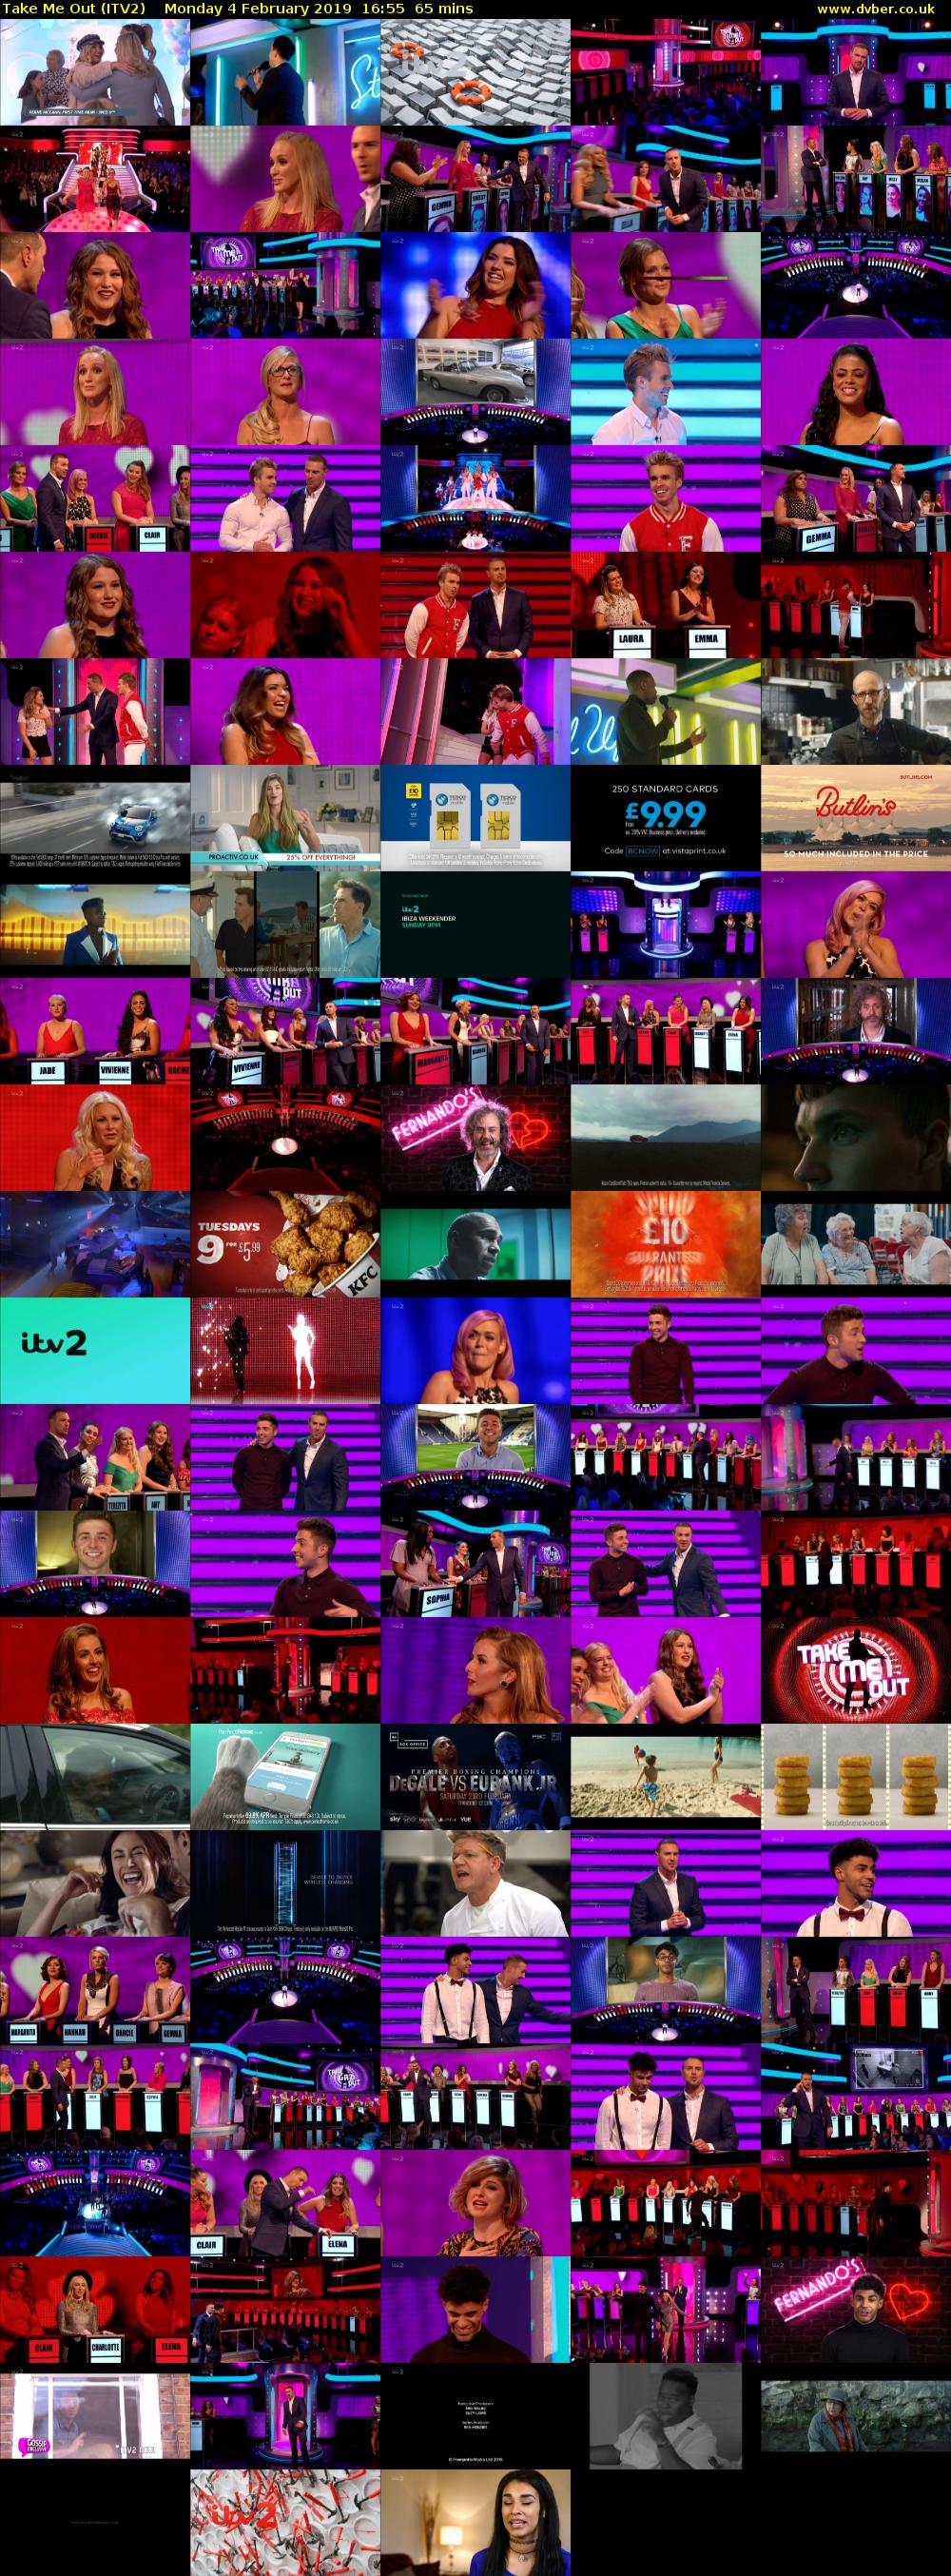 Take Me Out (ITV2) Monday 4 February 2019 16:55 - 18:00